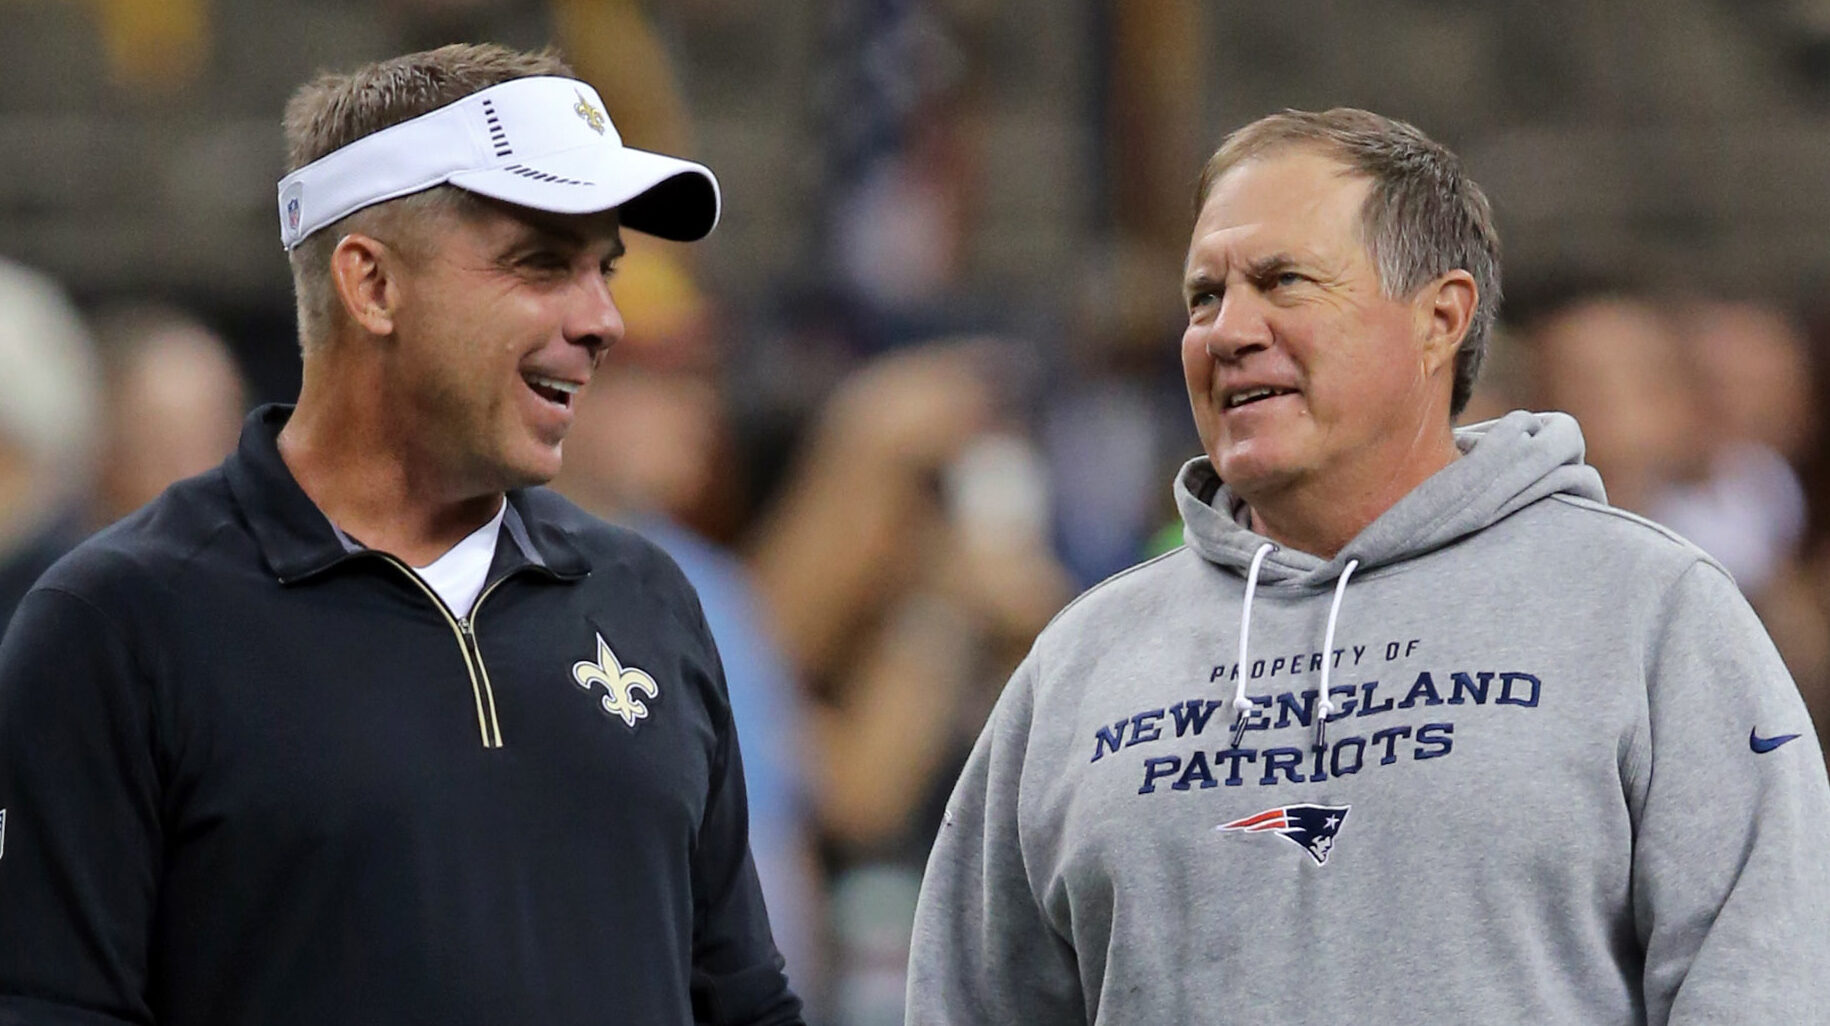 Sean Payton stands with Bill Belichick before a game in 2015